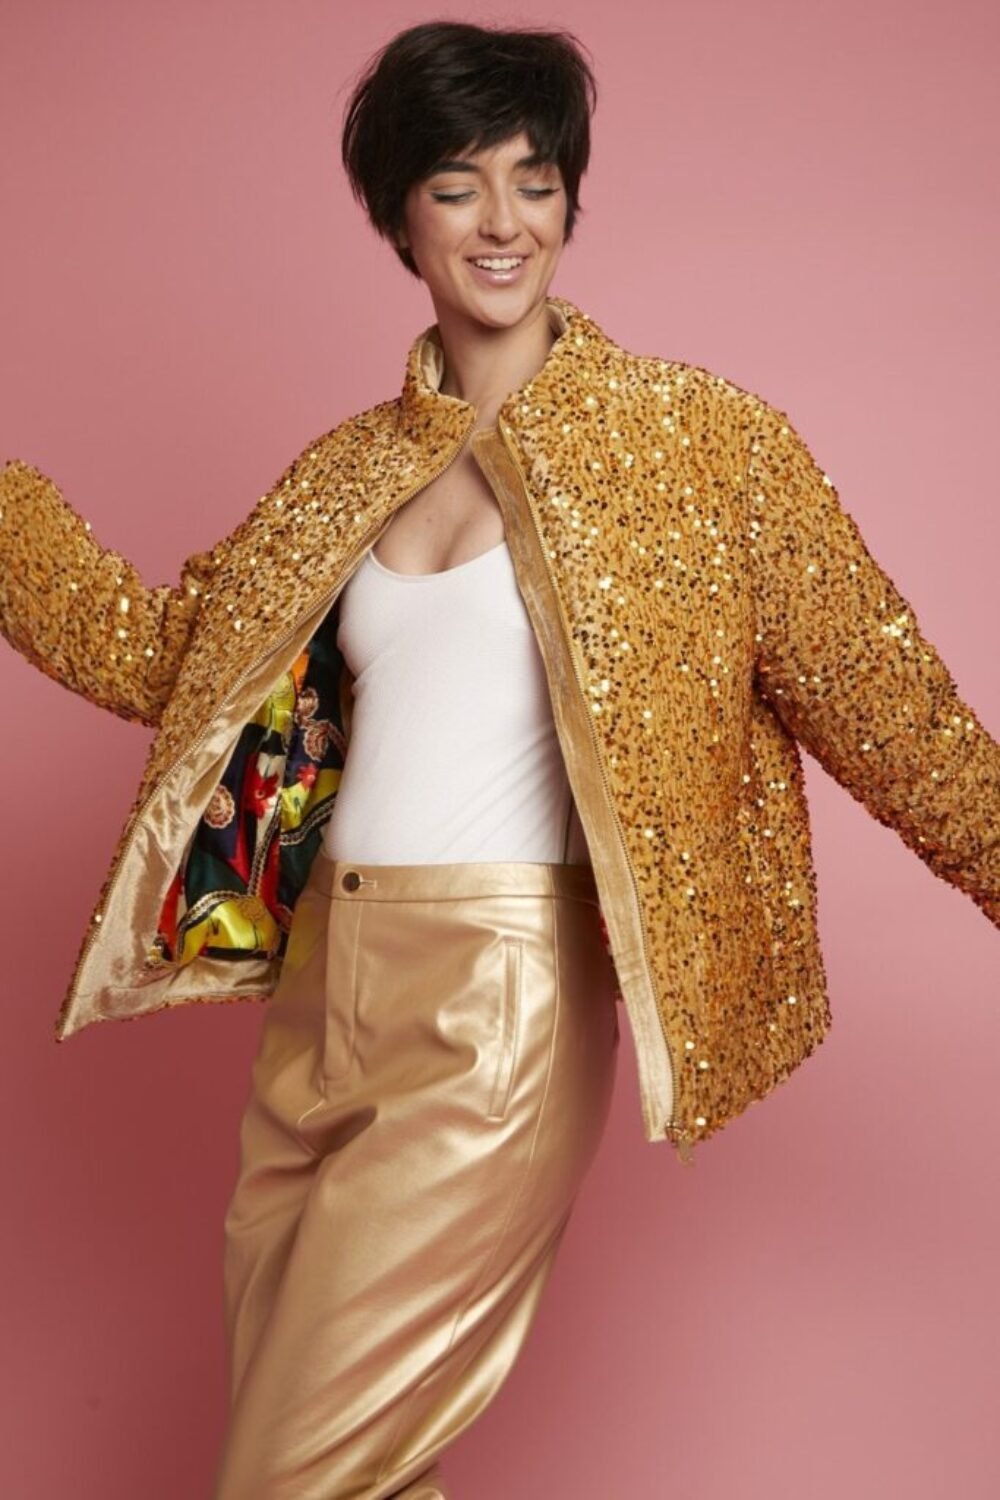 Shop Lux Gold Sequin Puffer Jacket and women's luxury and designer clothes at www.lux-apparel.co.uk